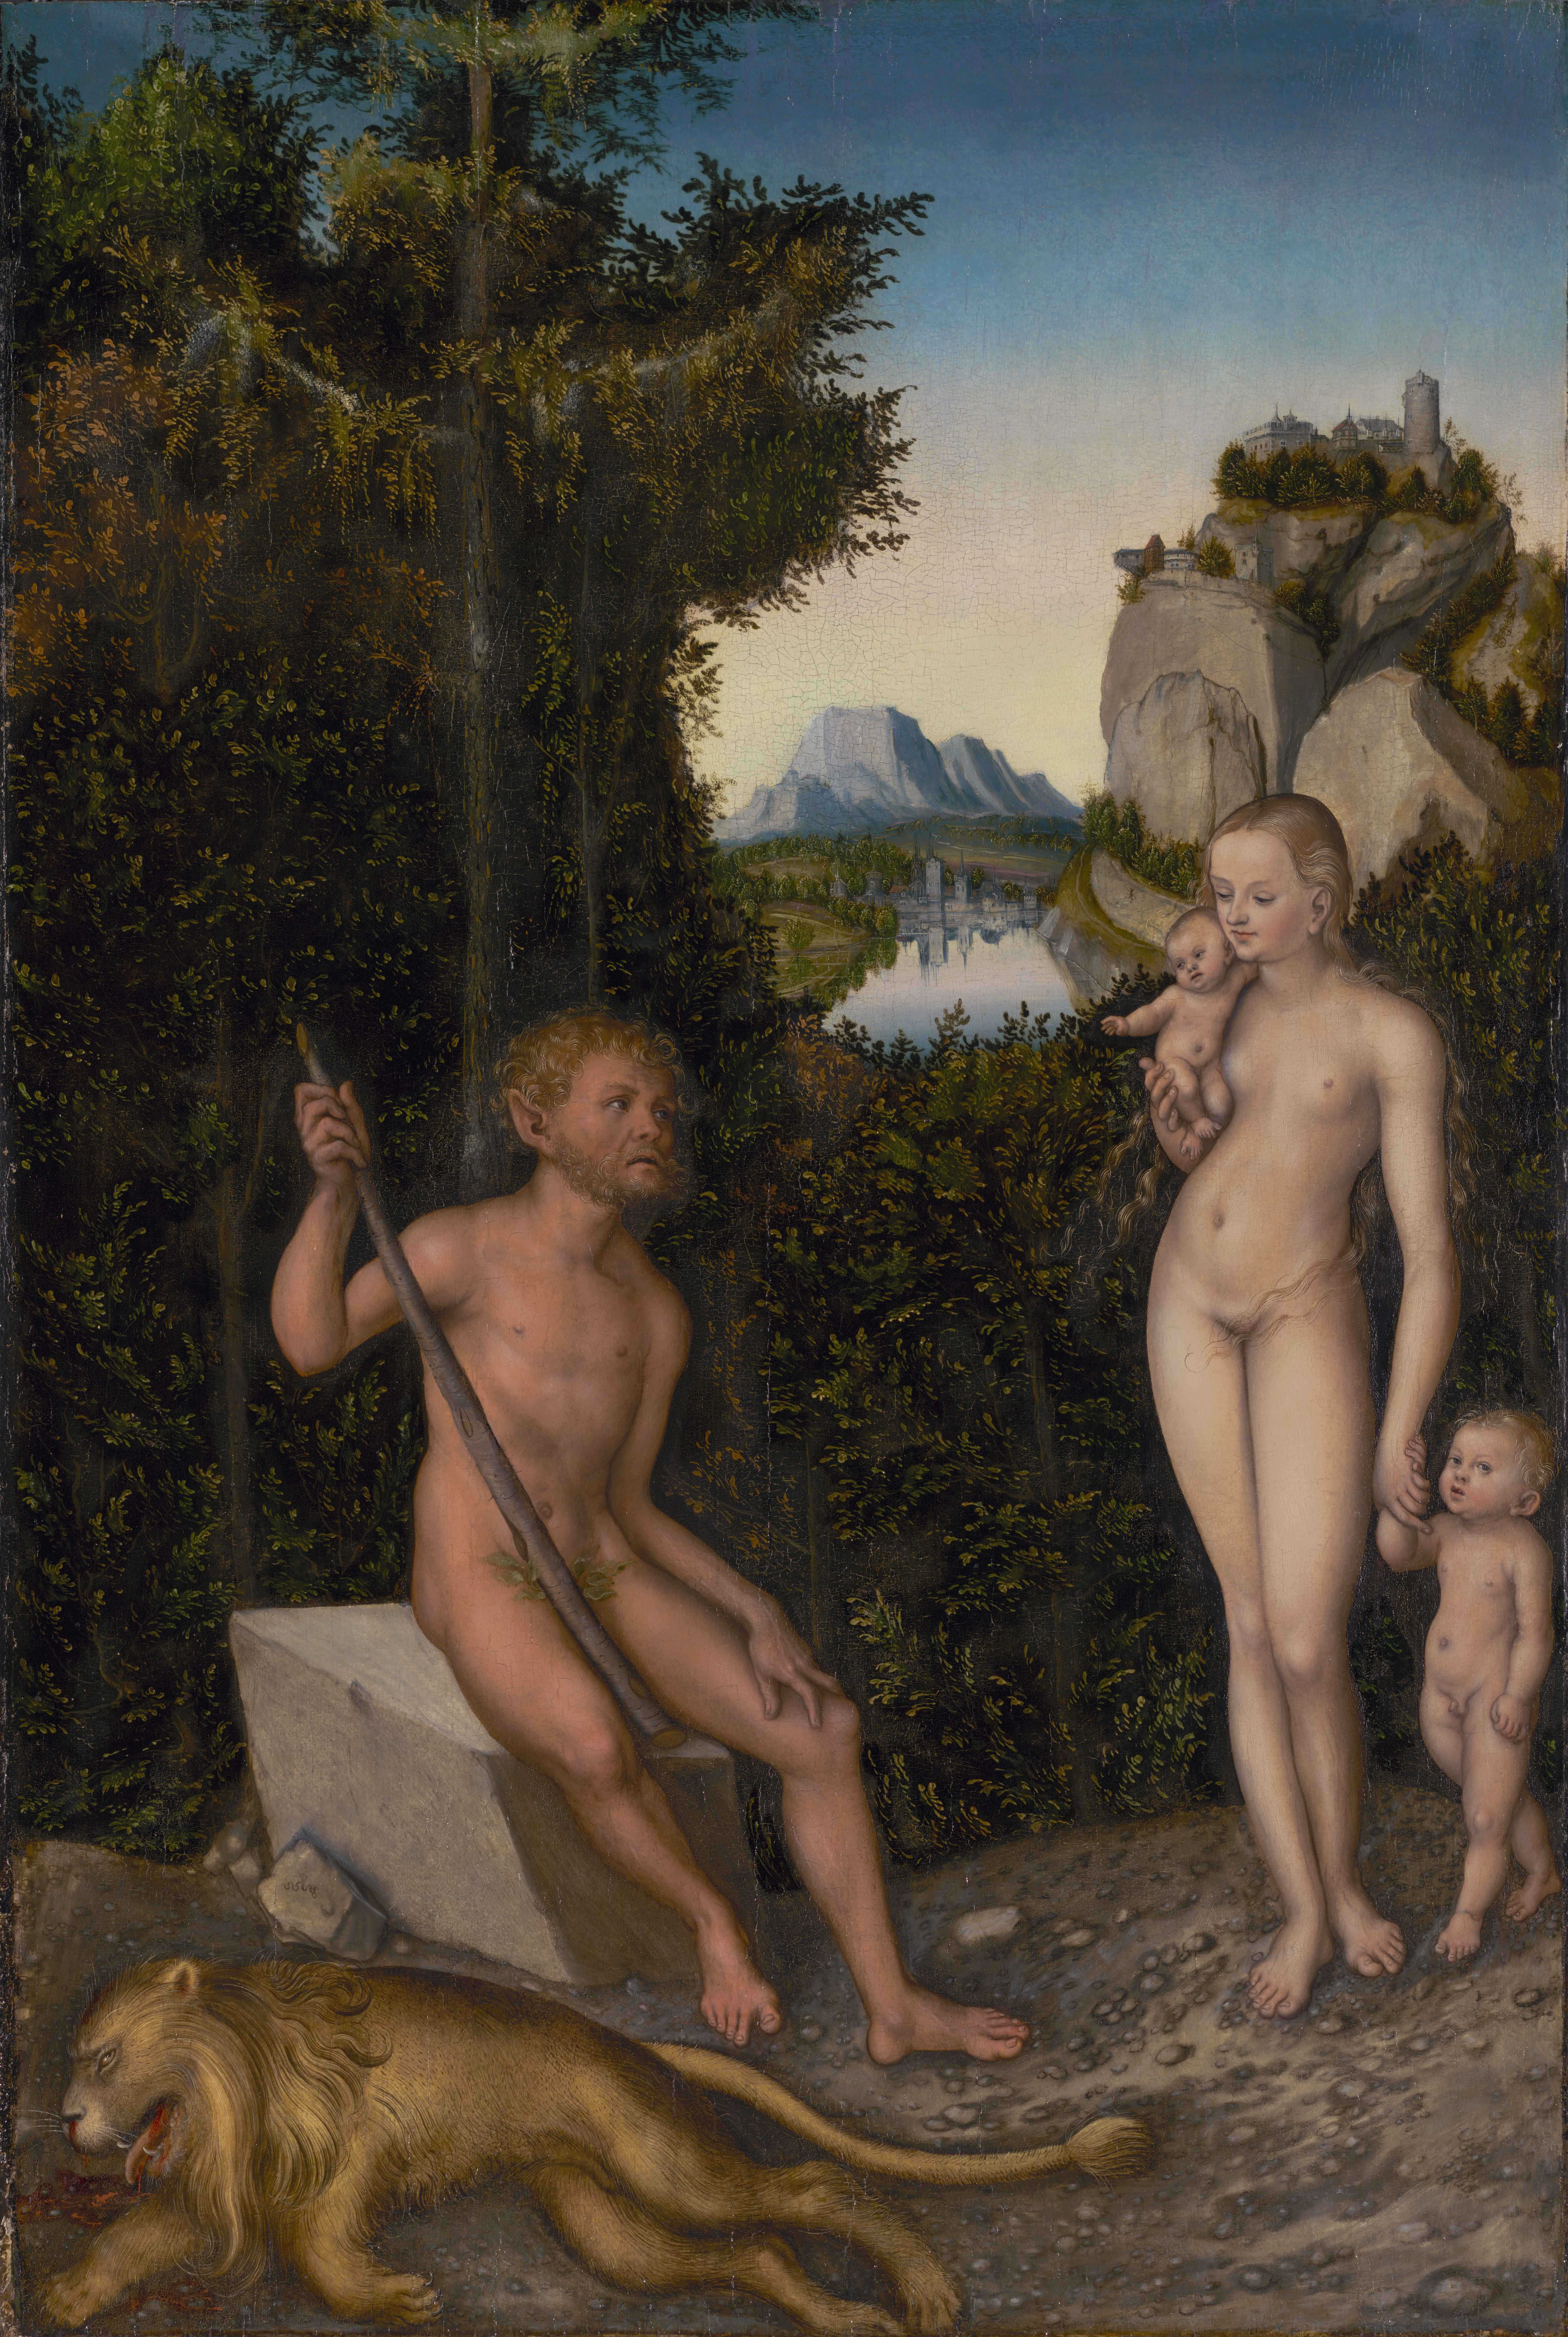 The Renaissance Nude, The Royal Academy of Arts, London, 3 March -2 June 2019